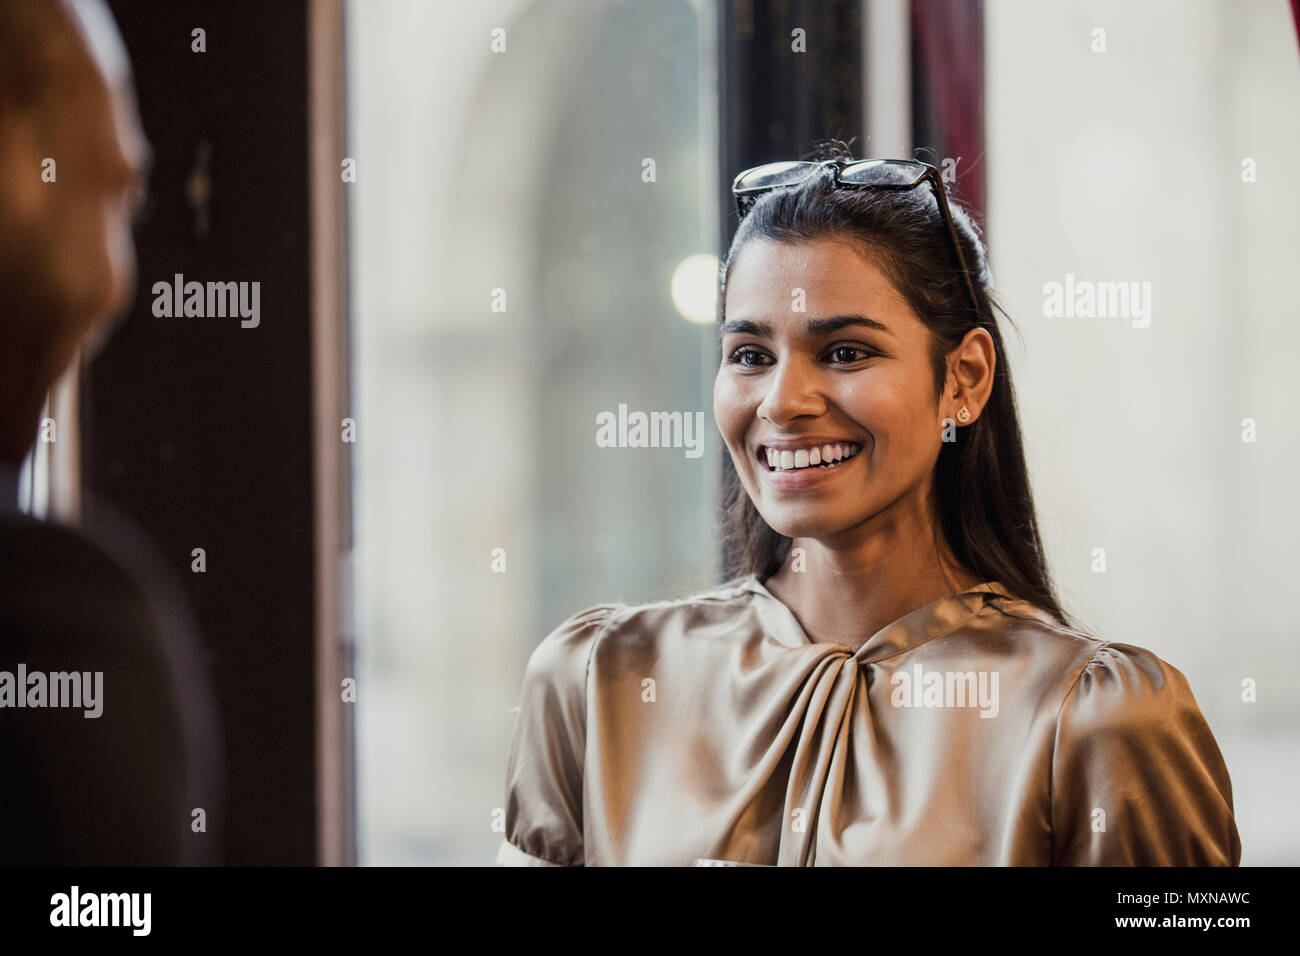 Over the shoulder view of a smiling businesswoman talking to an unrecognisable person. Stock Photo